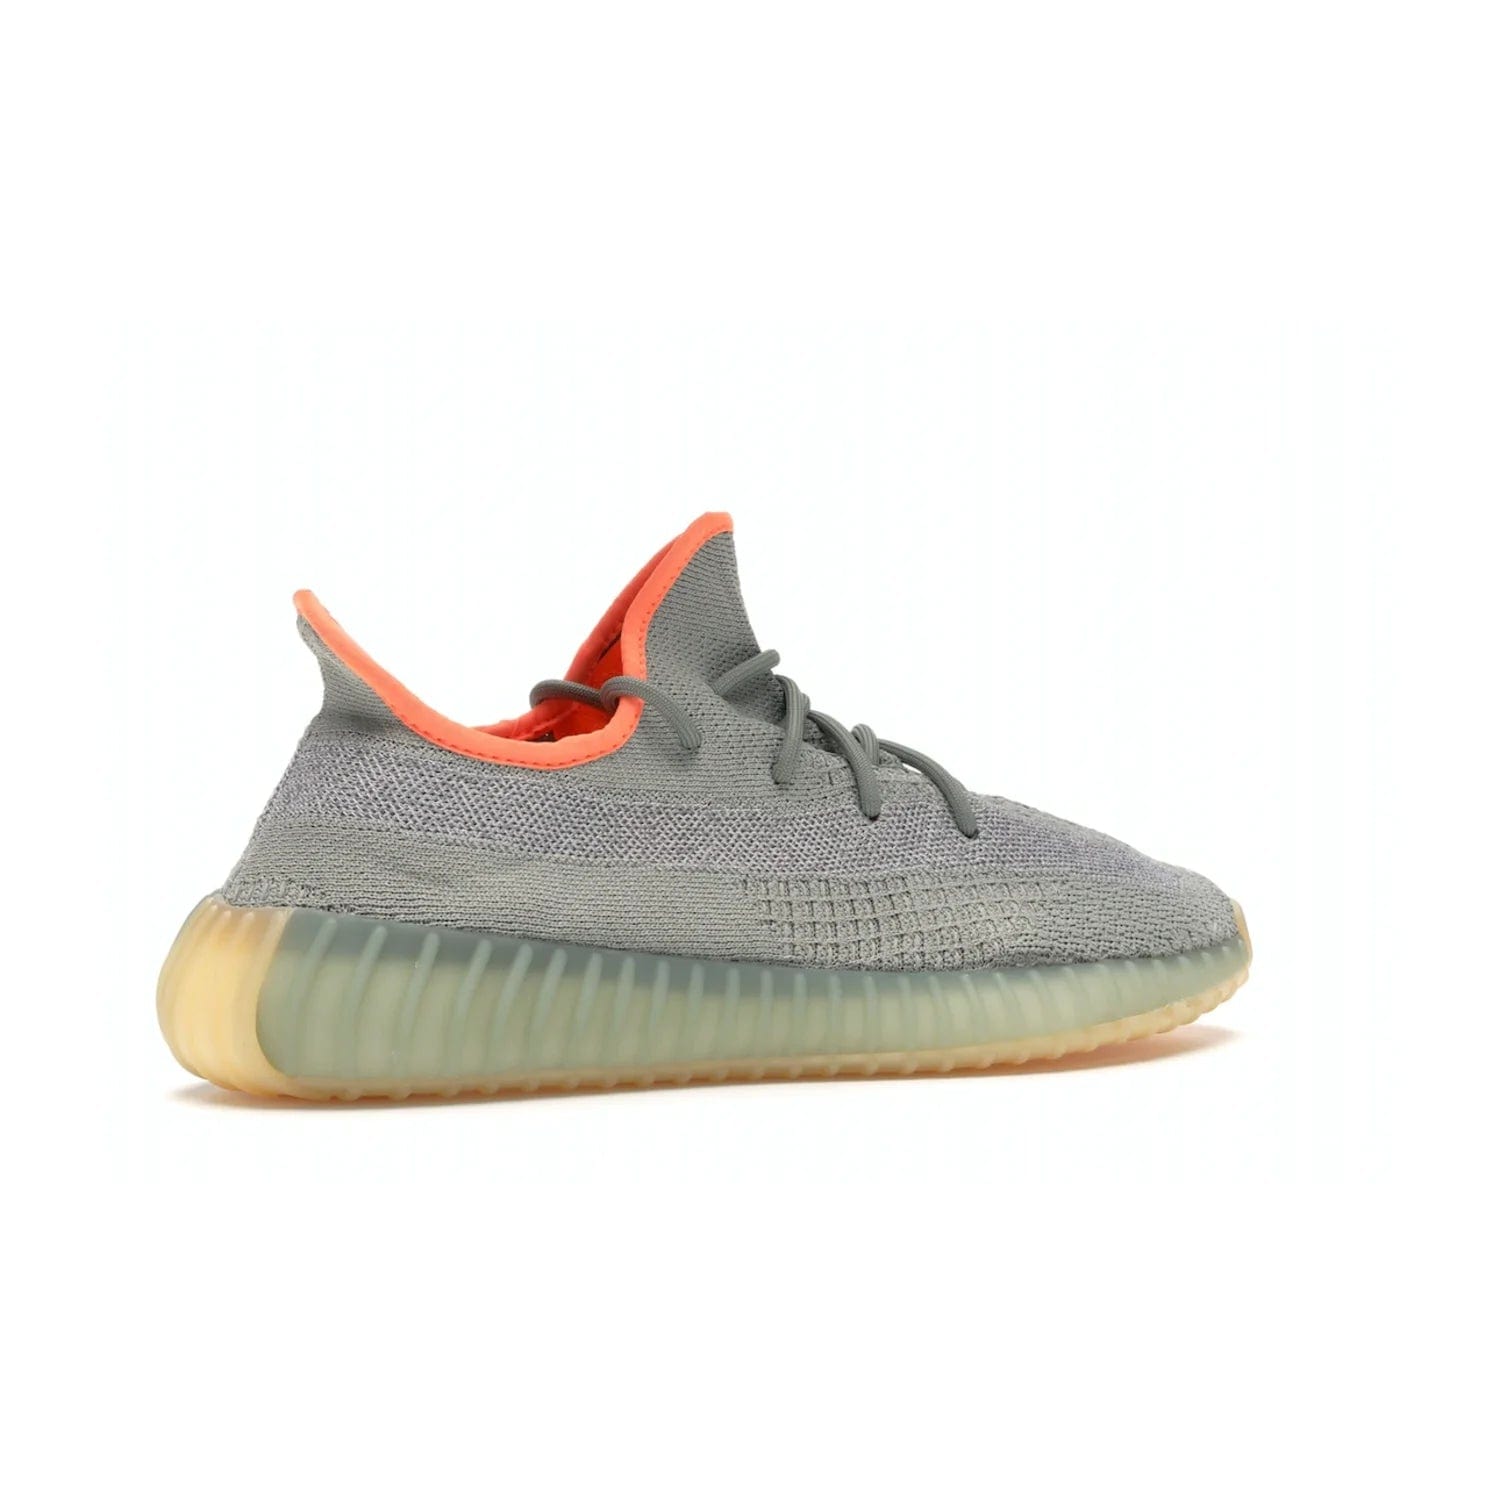 adidas Yeezy Boost 350 V2 Desert Sage - Image 34 - Only at www.BallersClubKickz.com - Upgrade your style with the adidas Yeezy Boost 350 V2 Desert Sage. This 350V2 features a Desert Sage primeknit upper with tonal side stripe, and an orange-highlighted translucent Boost cushioning sole. Stay on-trend in effortless style.